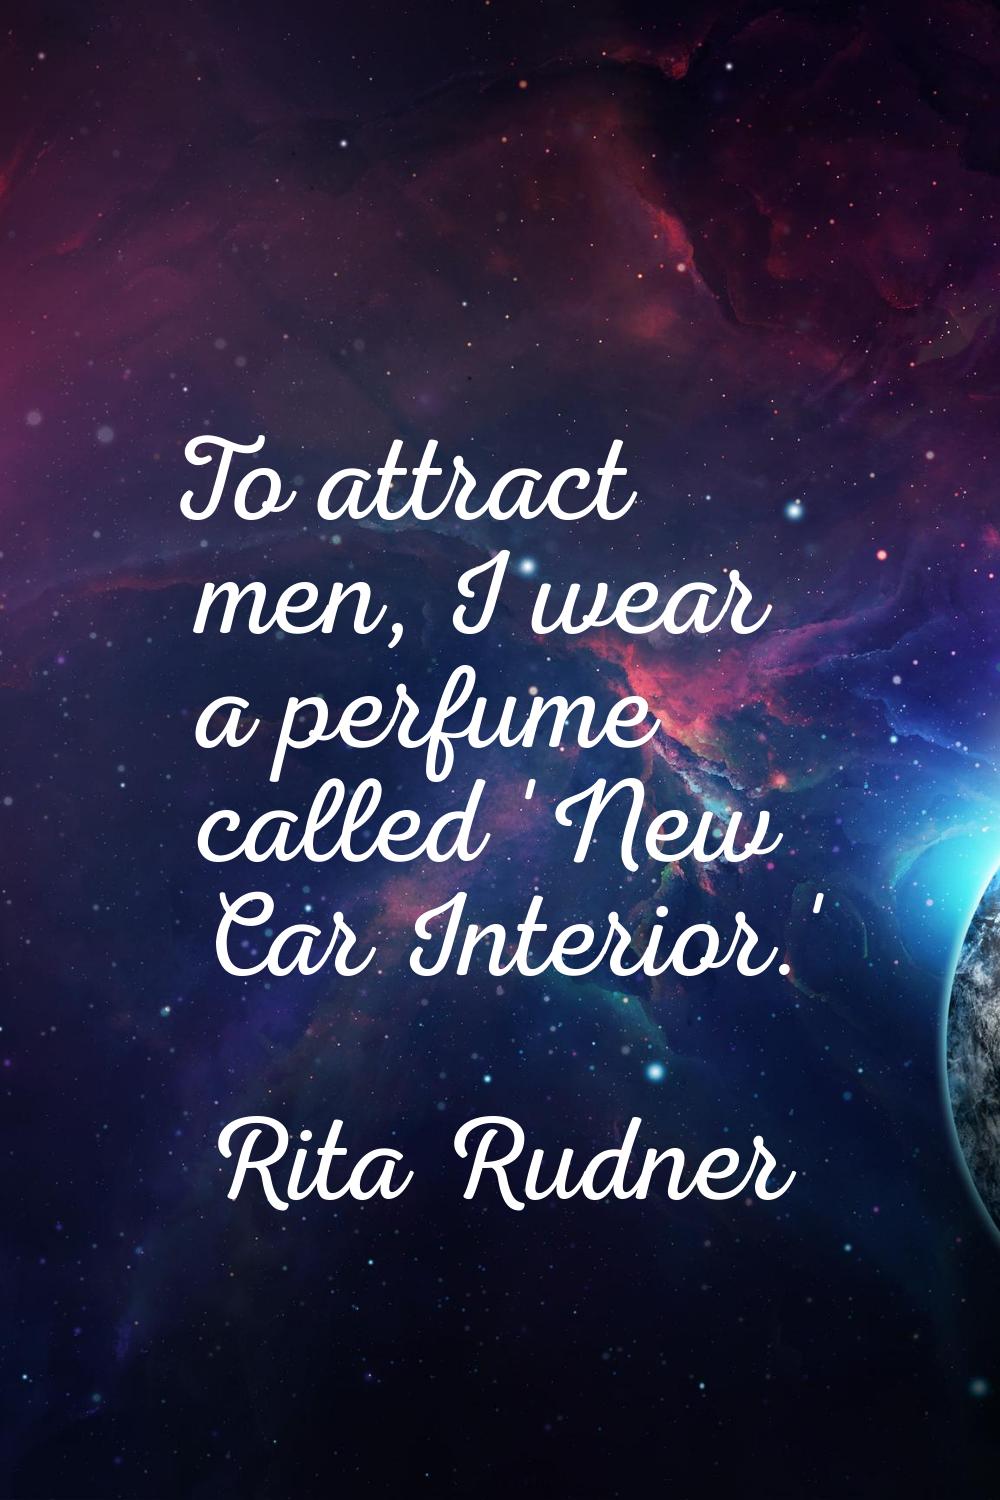 To attract men, I wear a perfume called 'New Car Interior.'